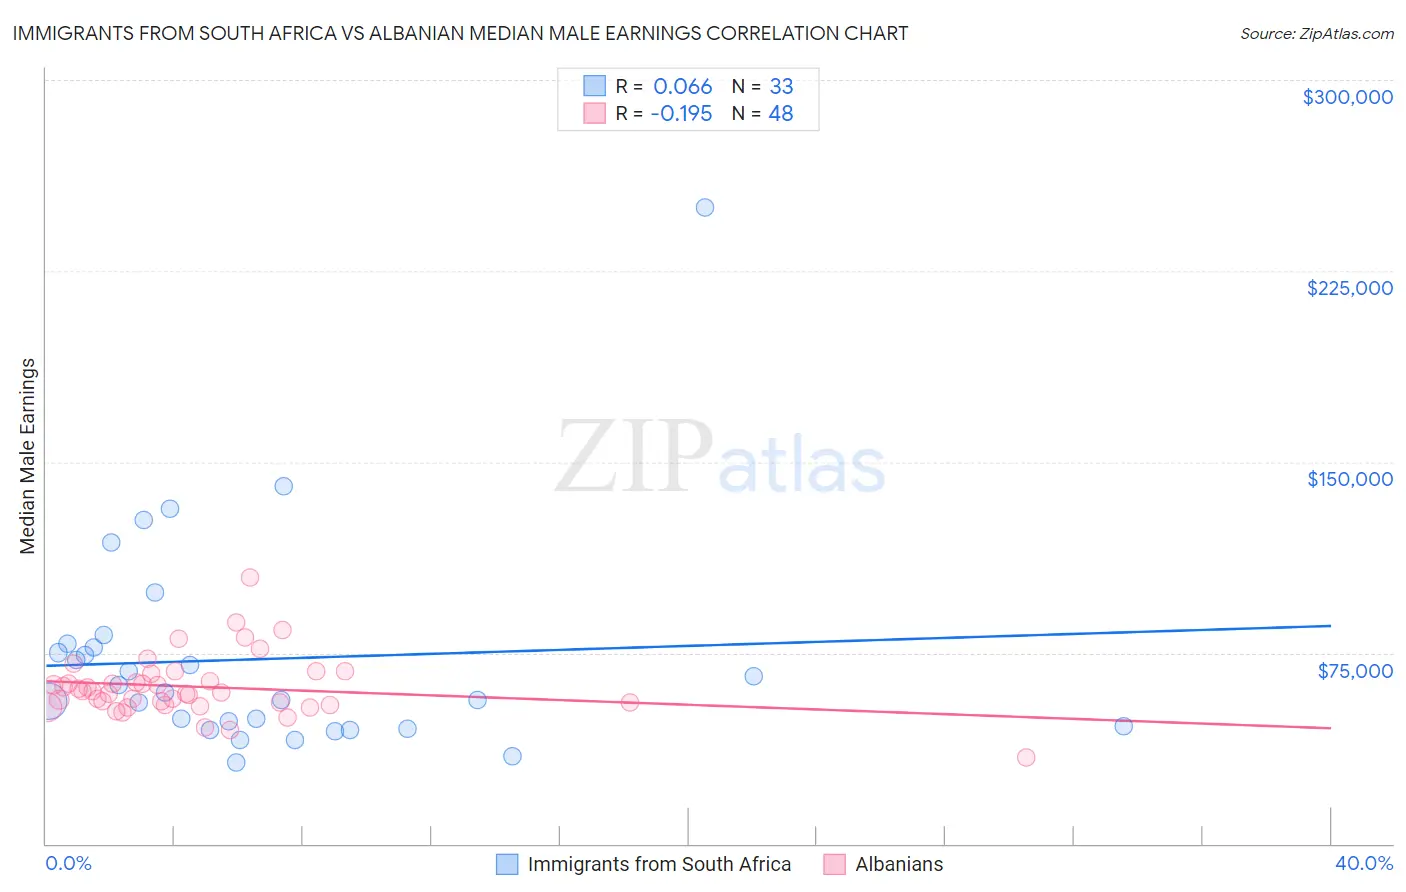 Immigrants from South Africa vs Albanian Median Male Earnings